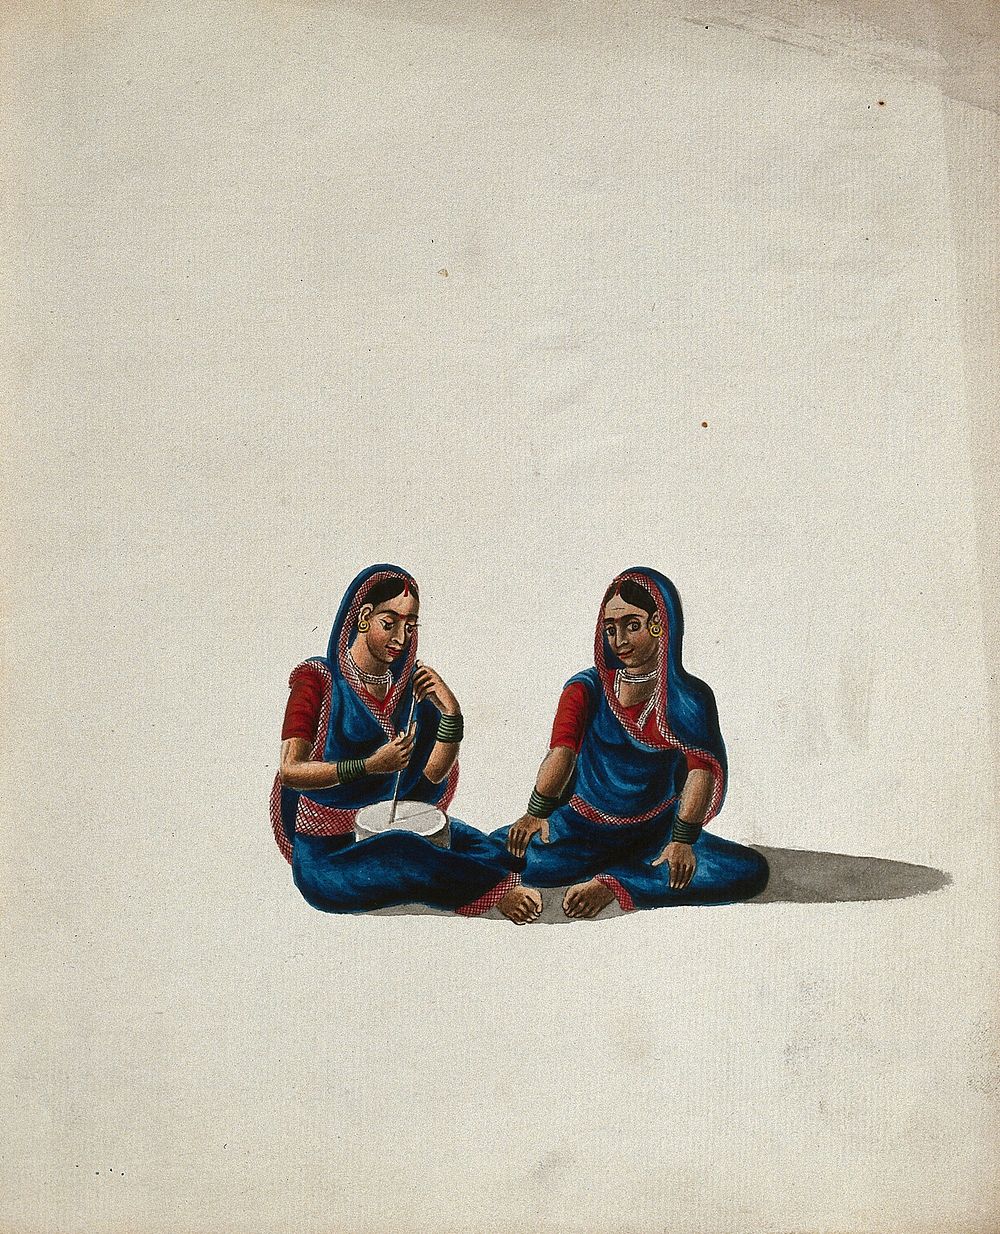 Two women in blue and red sarees sitting together. Gouache painting by an Indian artist.